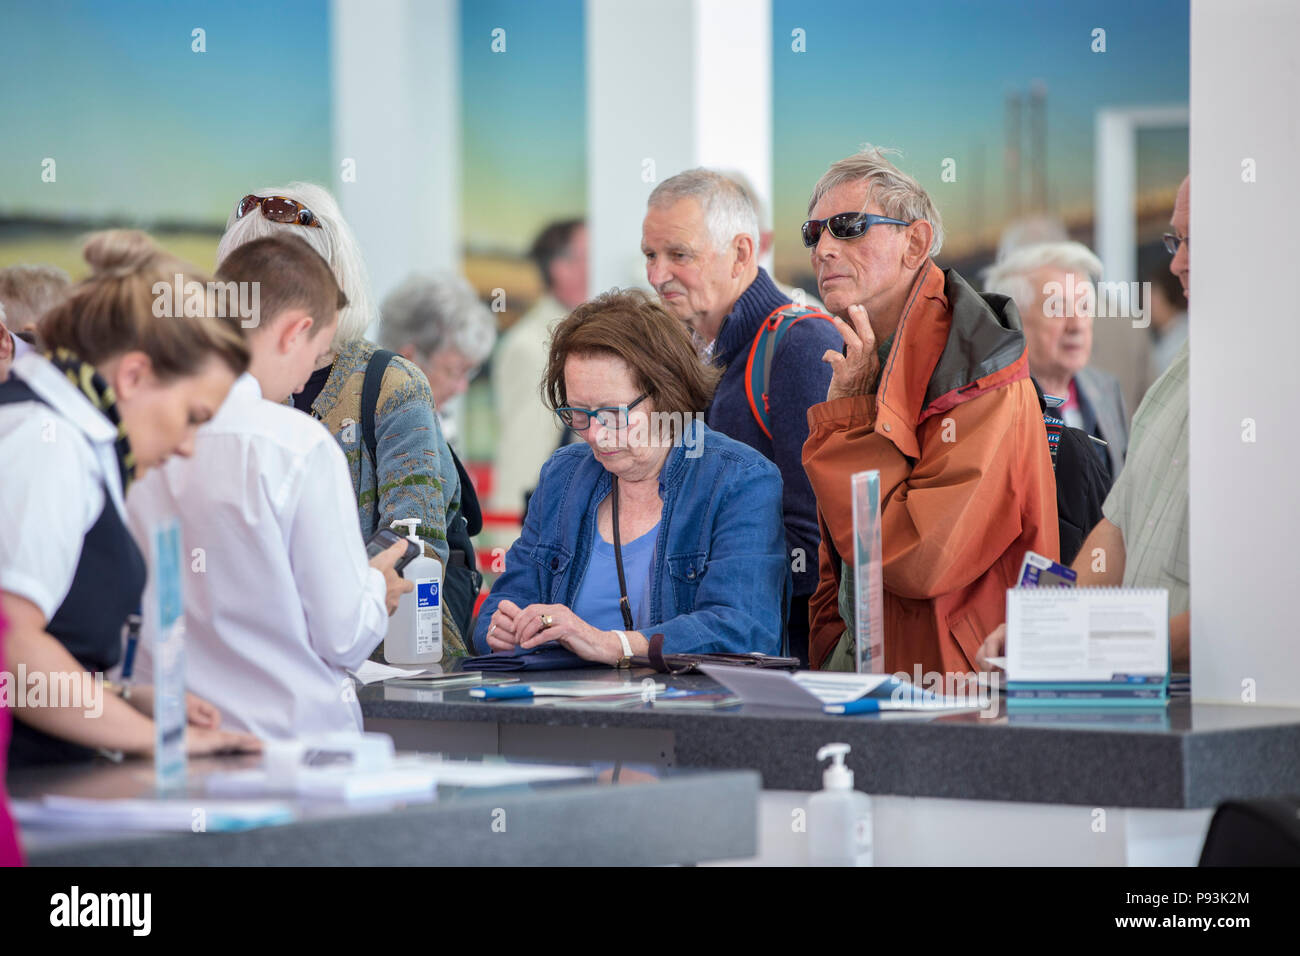 Elderly people queuing for cruise ship Stock Photo